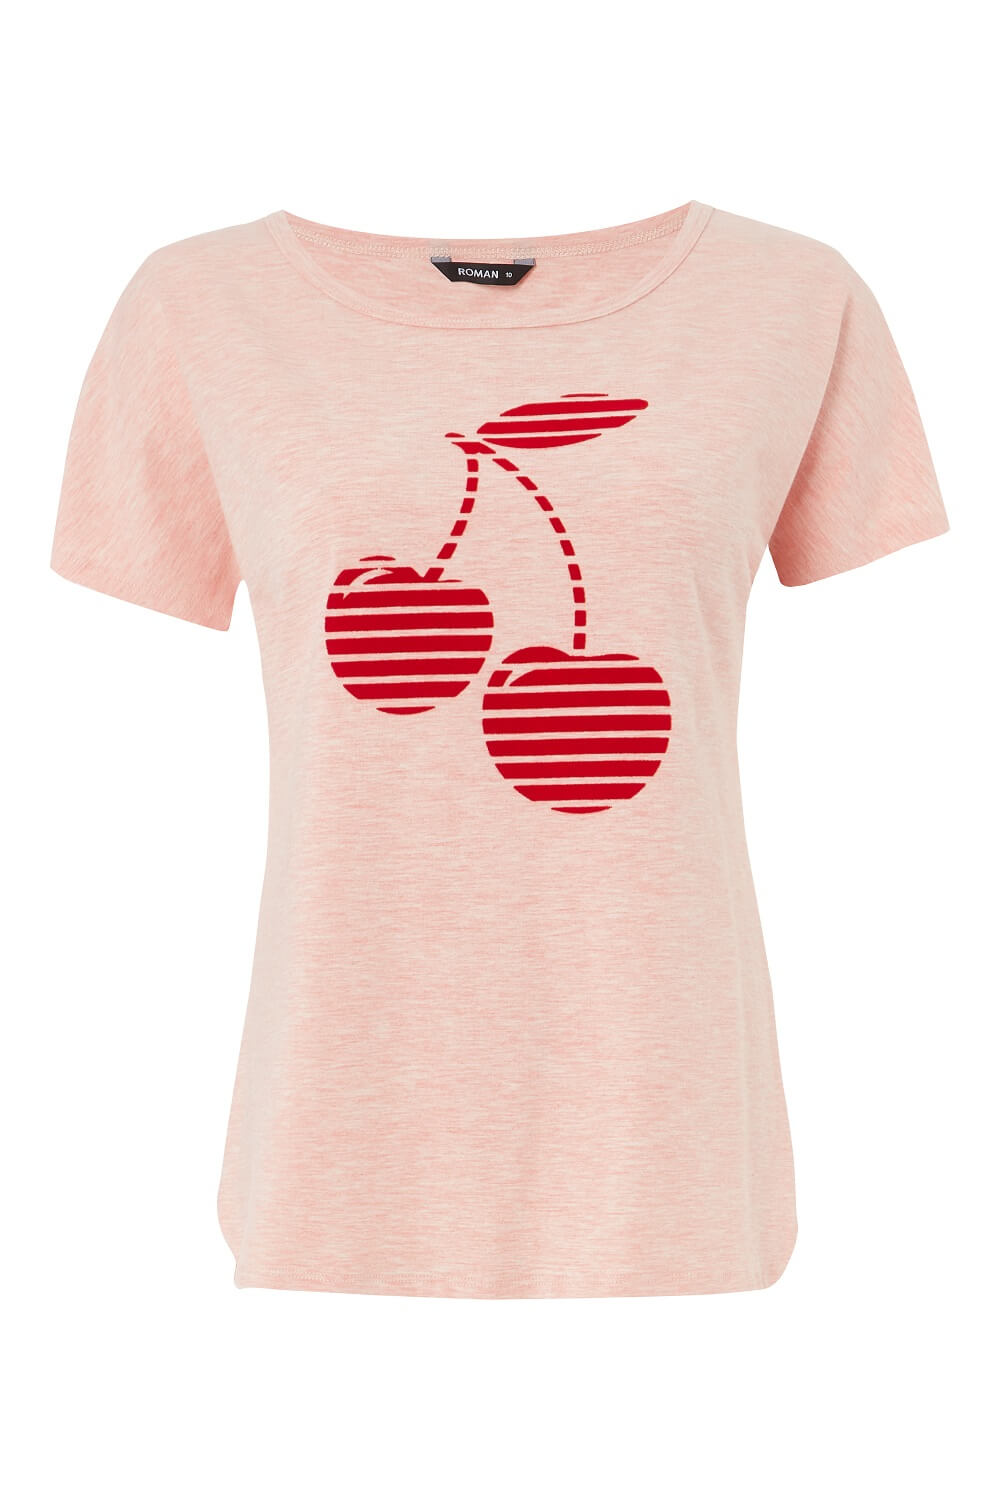 PINK Textured Cherry Print Jersey T-Shirt, Image 5 of 5